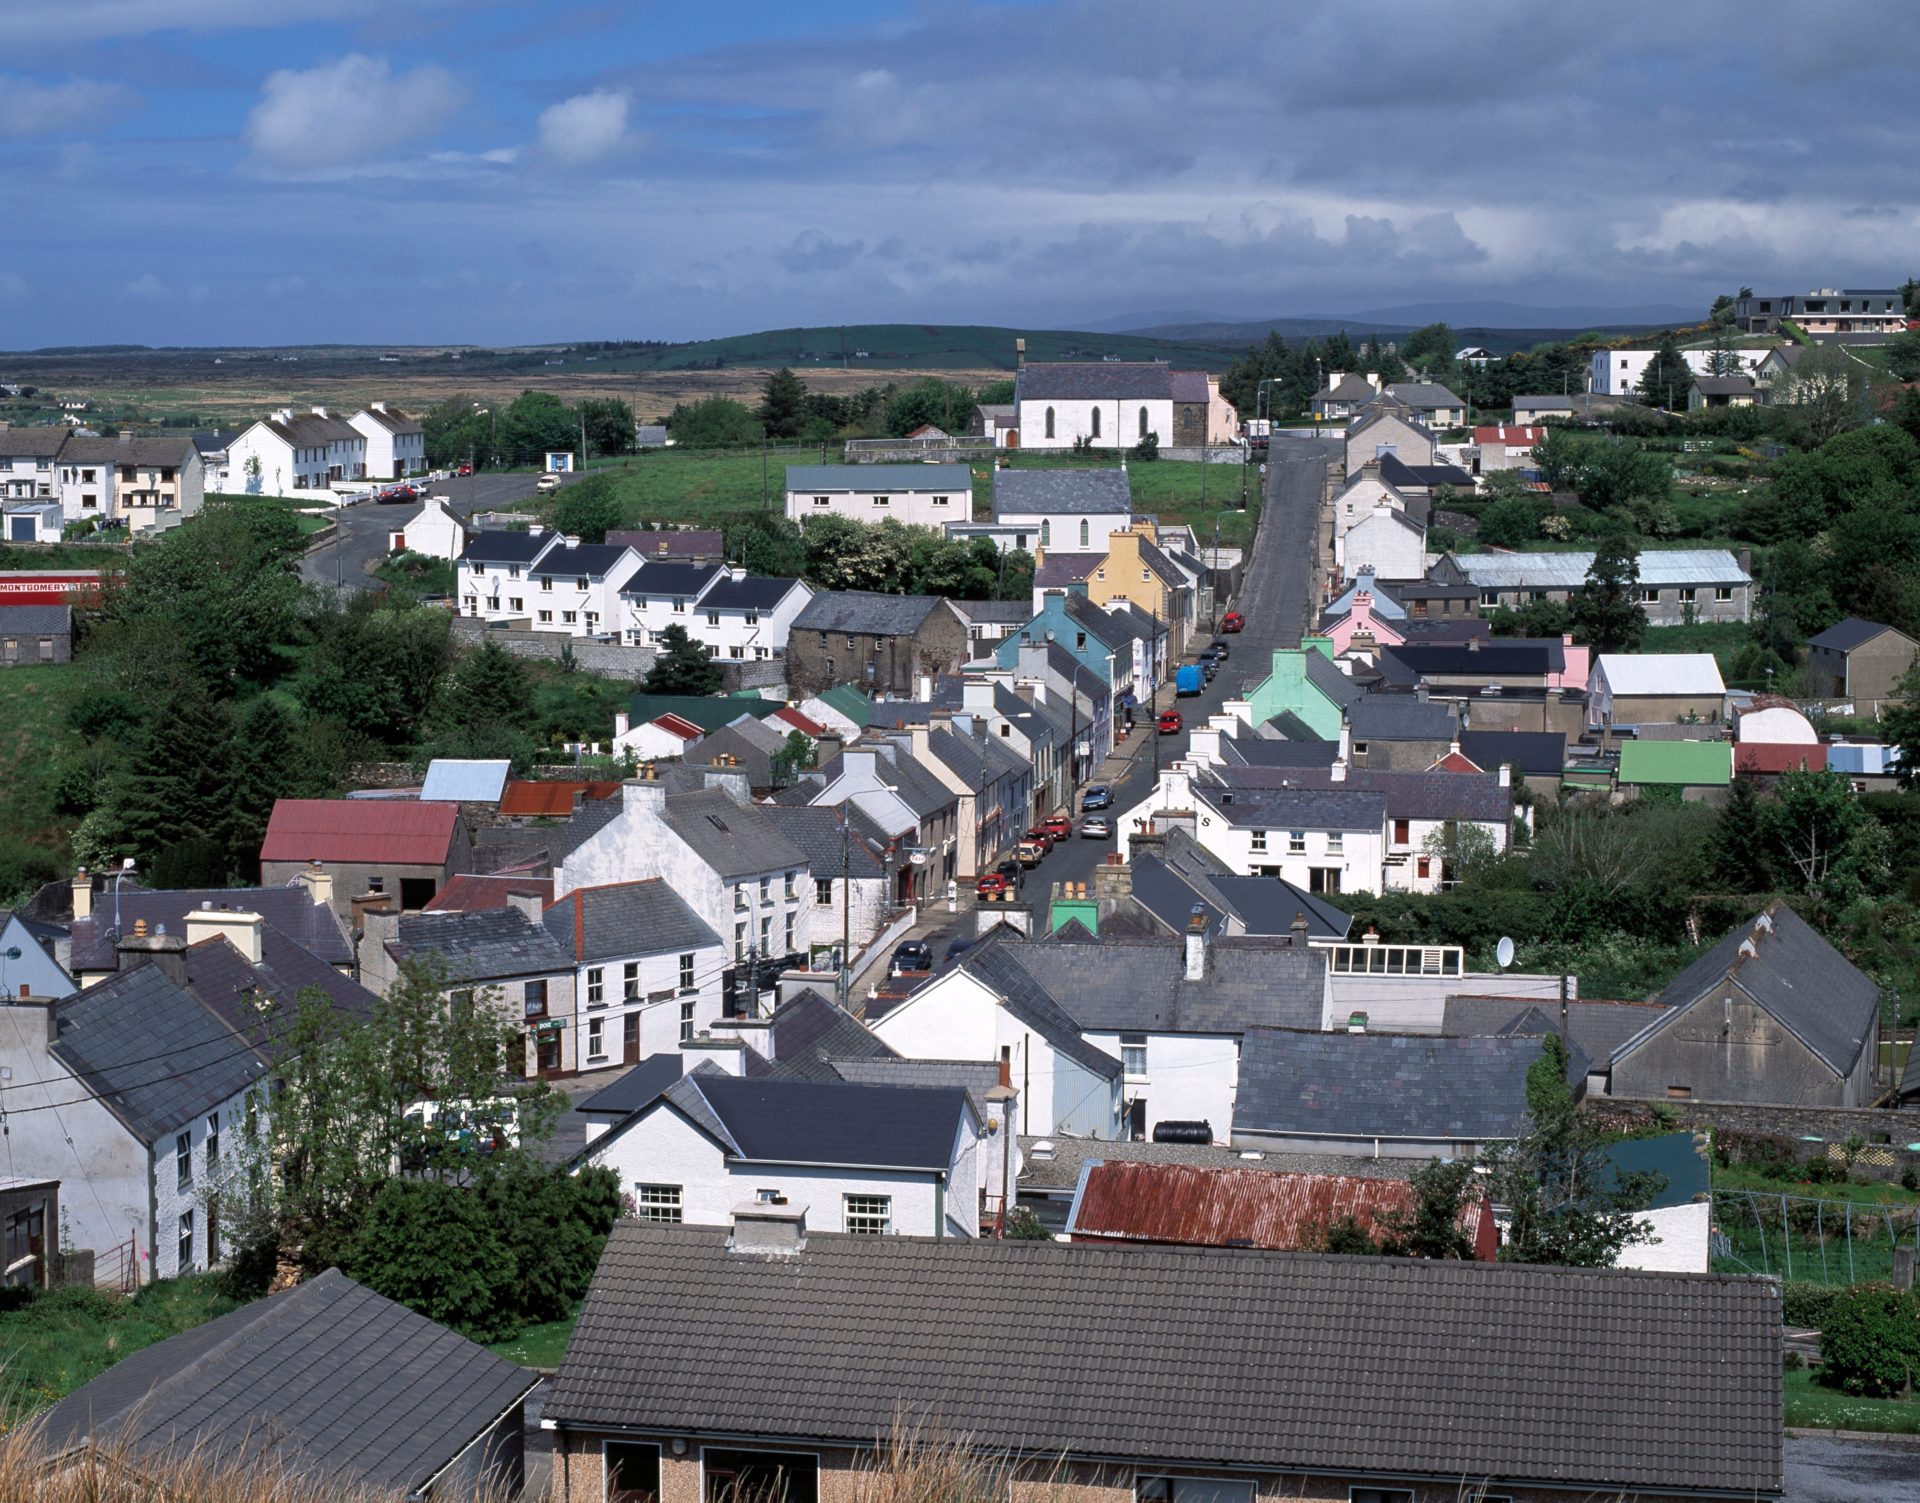 A view of Annascaul village in Co Kerry.